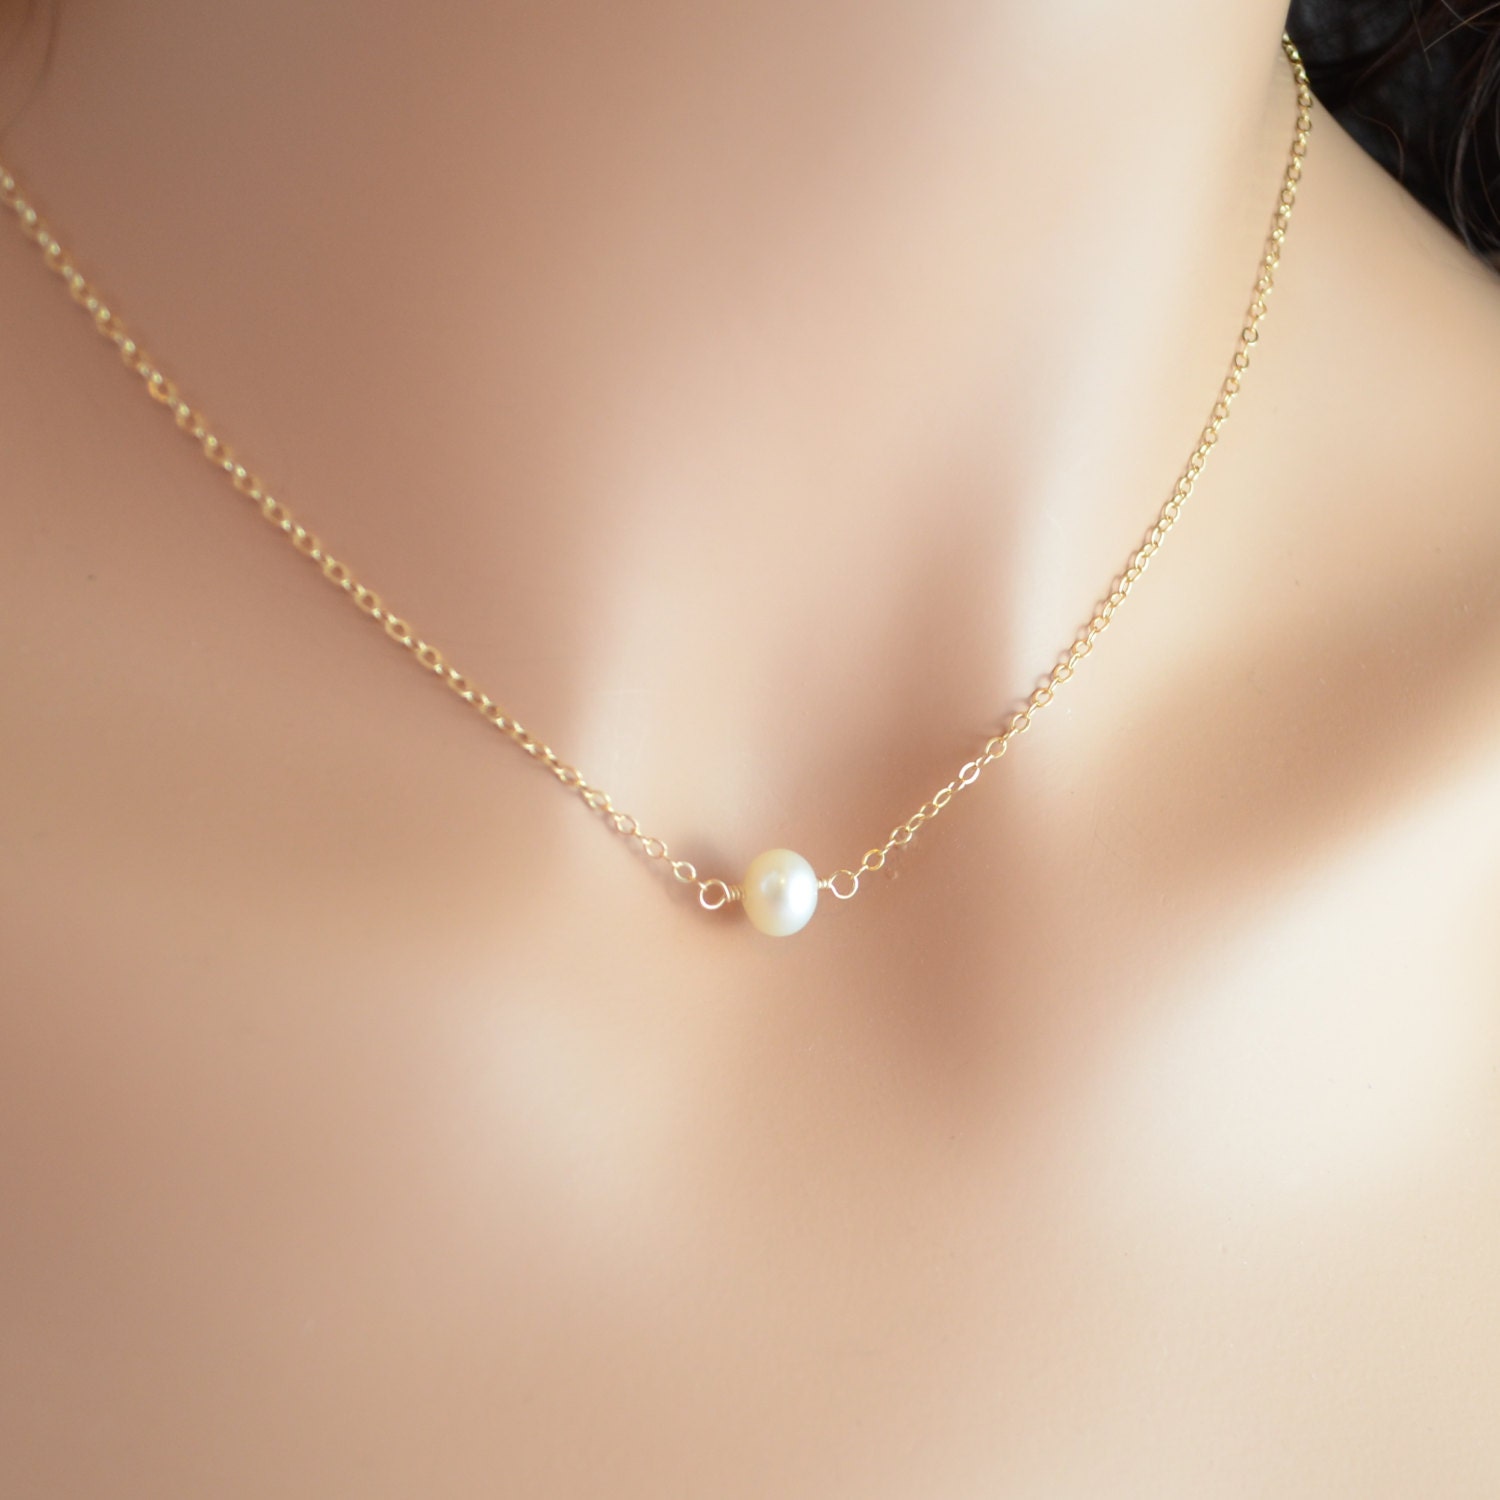 White Pearl Choker, Freshwater Pearl Necklace, Floating Necklace ...